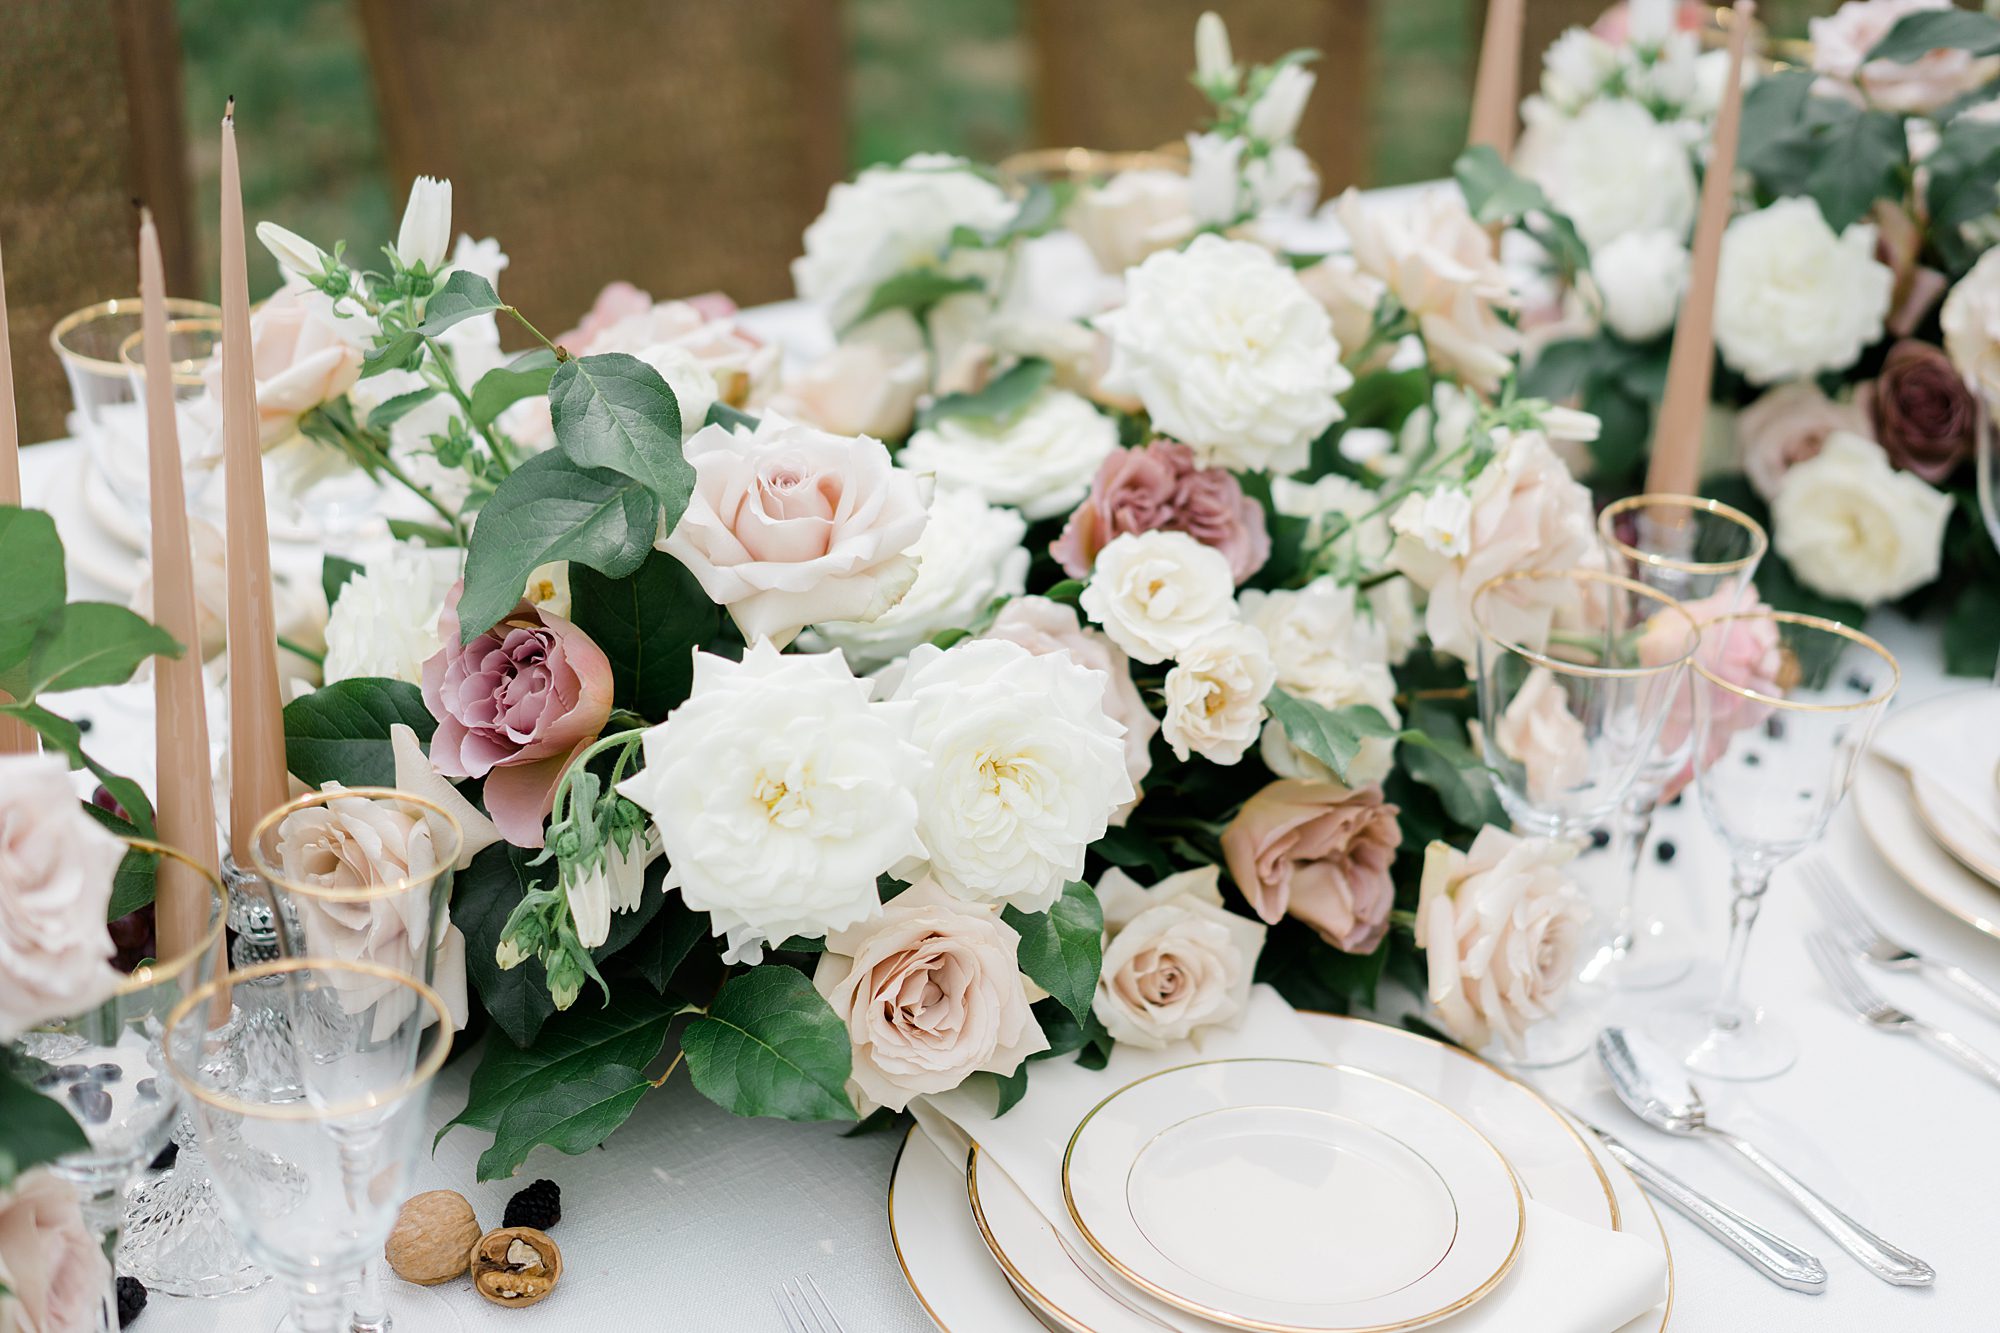 white plates with gold embellishments and flower centerpieces from Historic Salubria Wedding